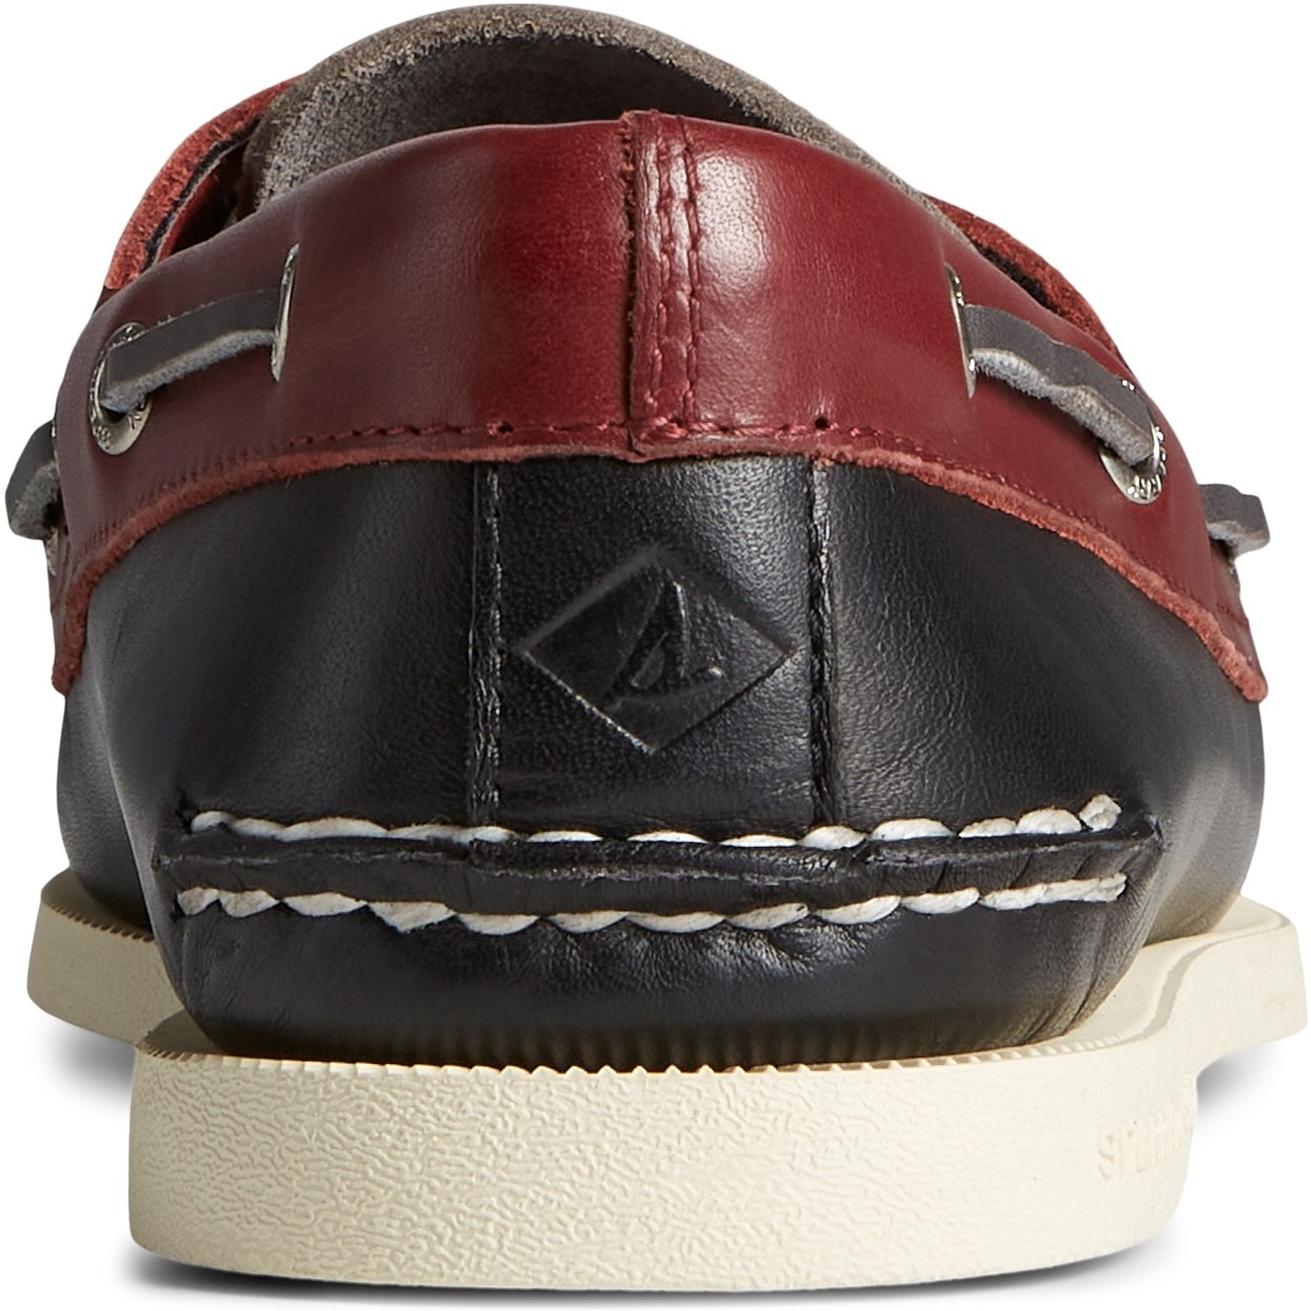 Sperry Top-sider Authentic Original 2-Eye Tri-Tone Shoes